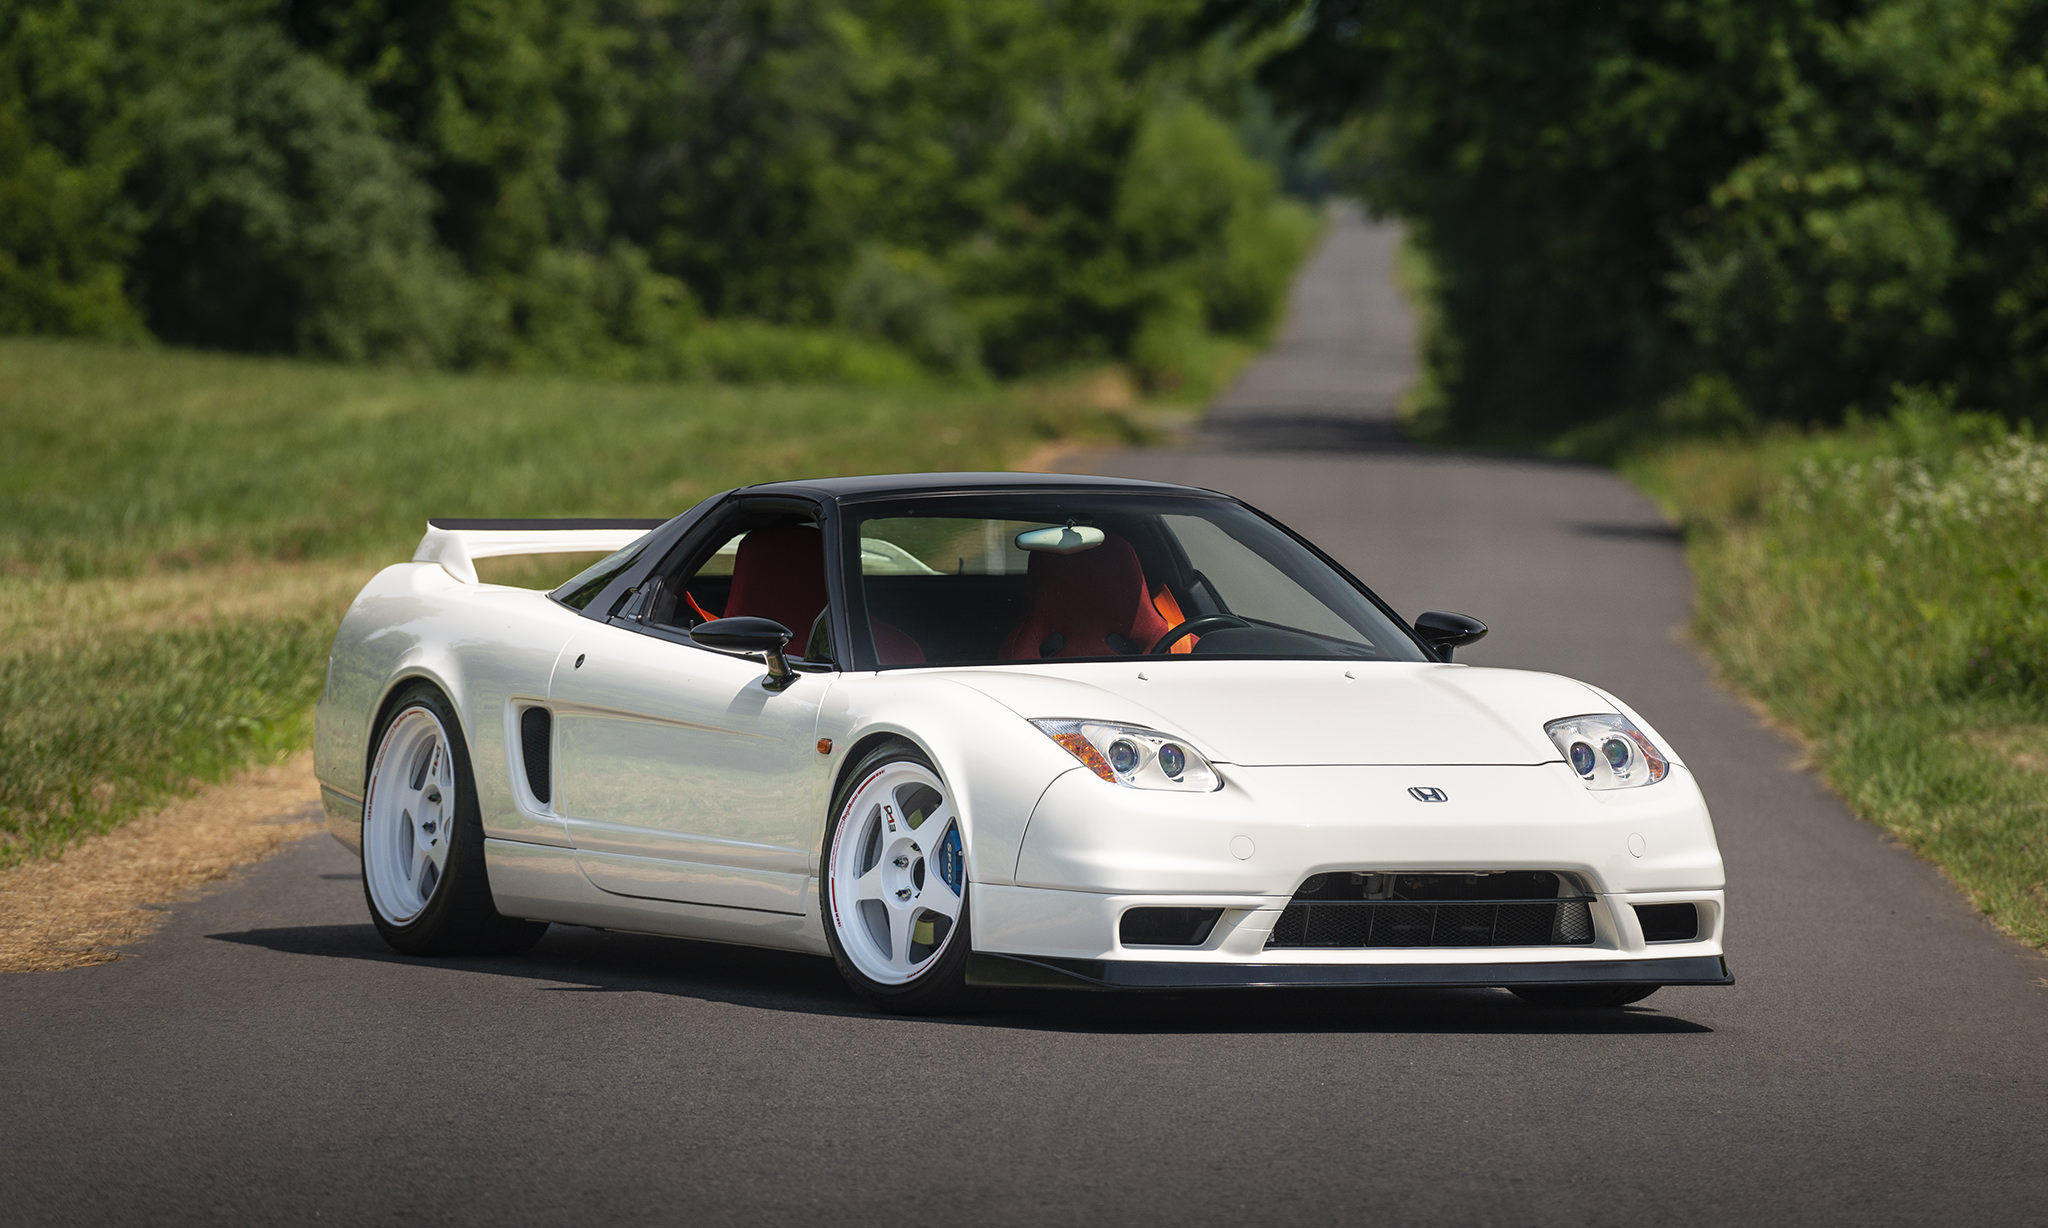 Pure Stock-Engined Supremacy: George Gomez' 2003 Acura NSX